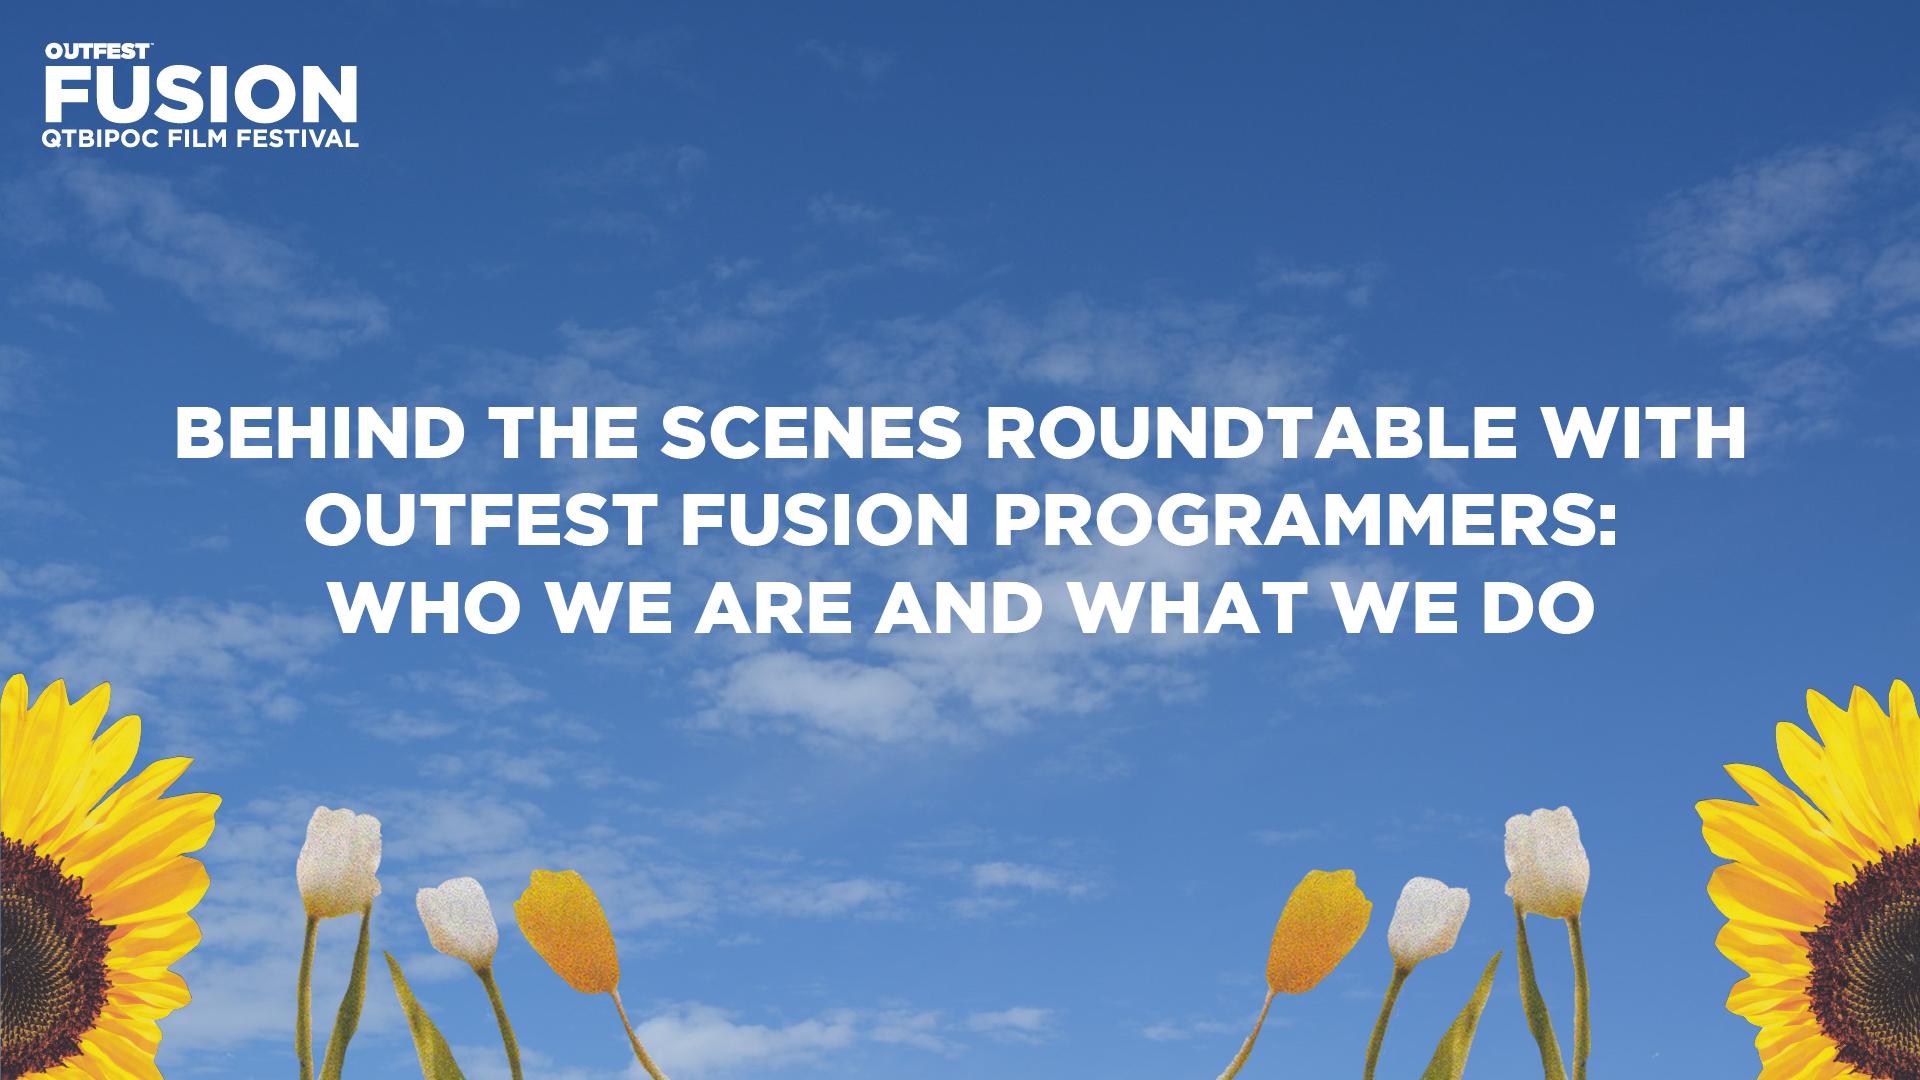 Behind the Scenes Roundtable with Outfest Fusion Programmers: Who We Are and What We Do